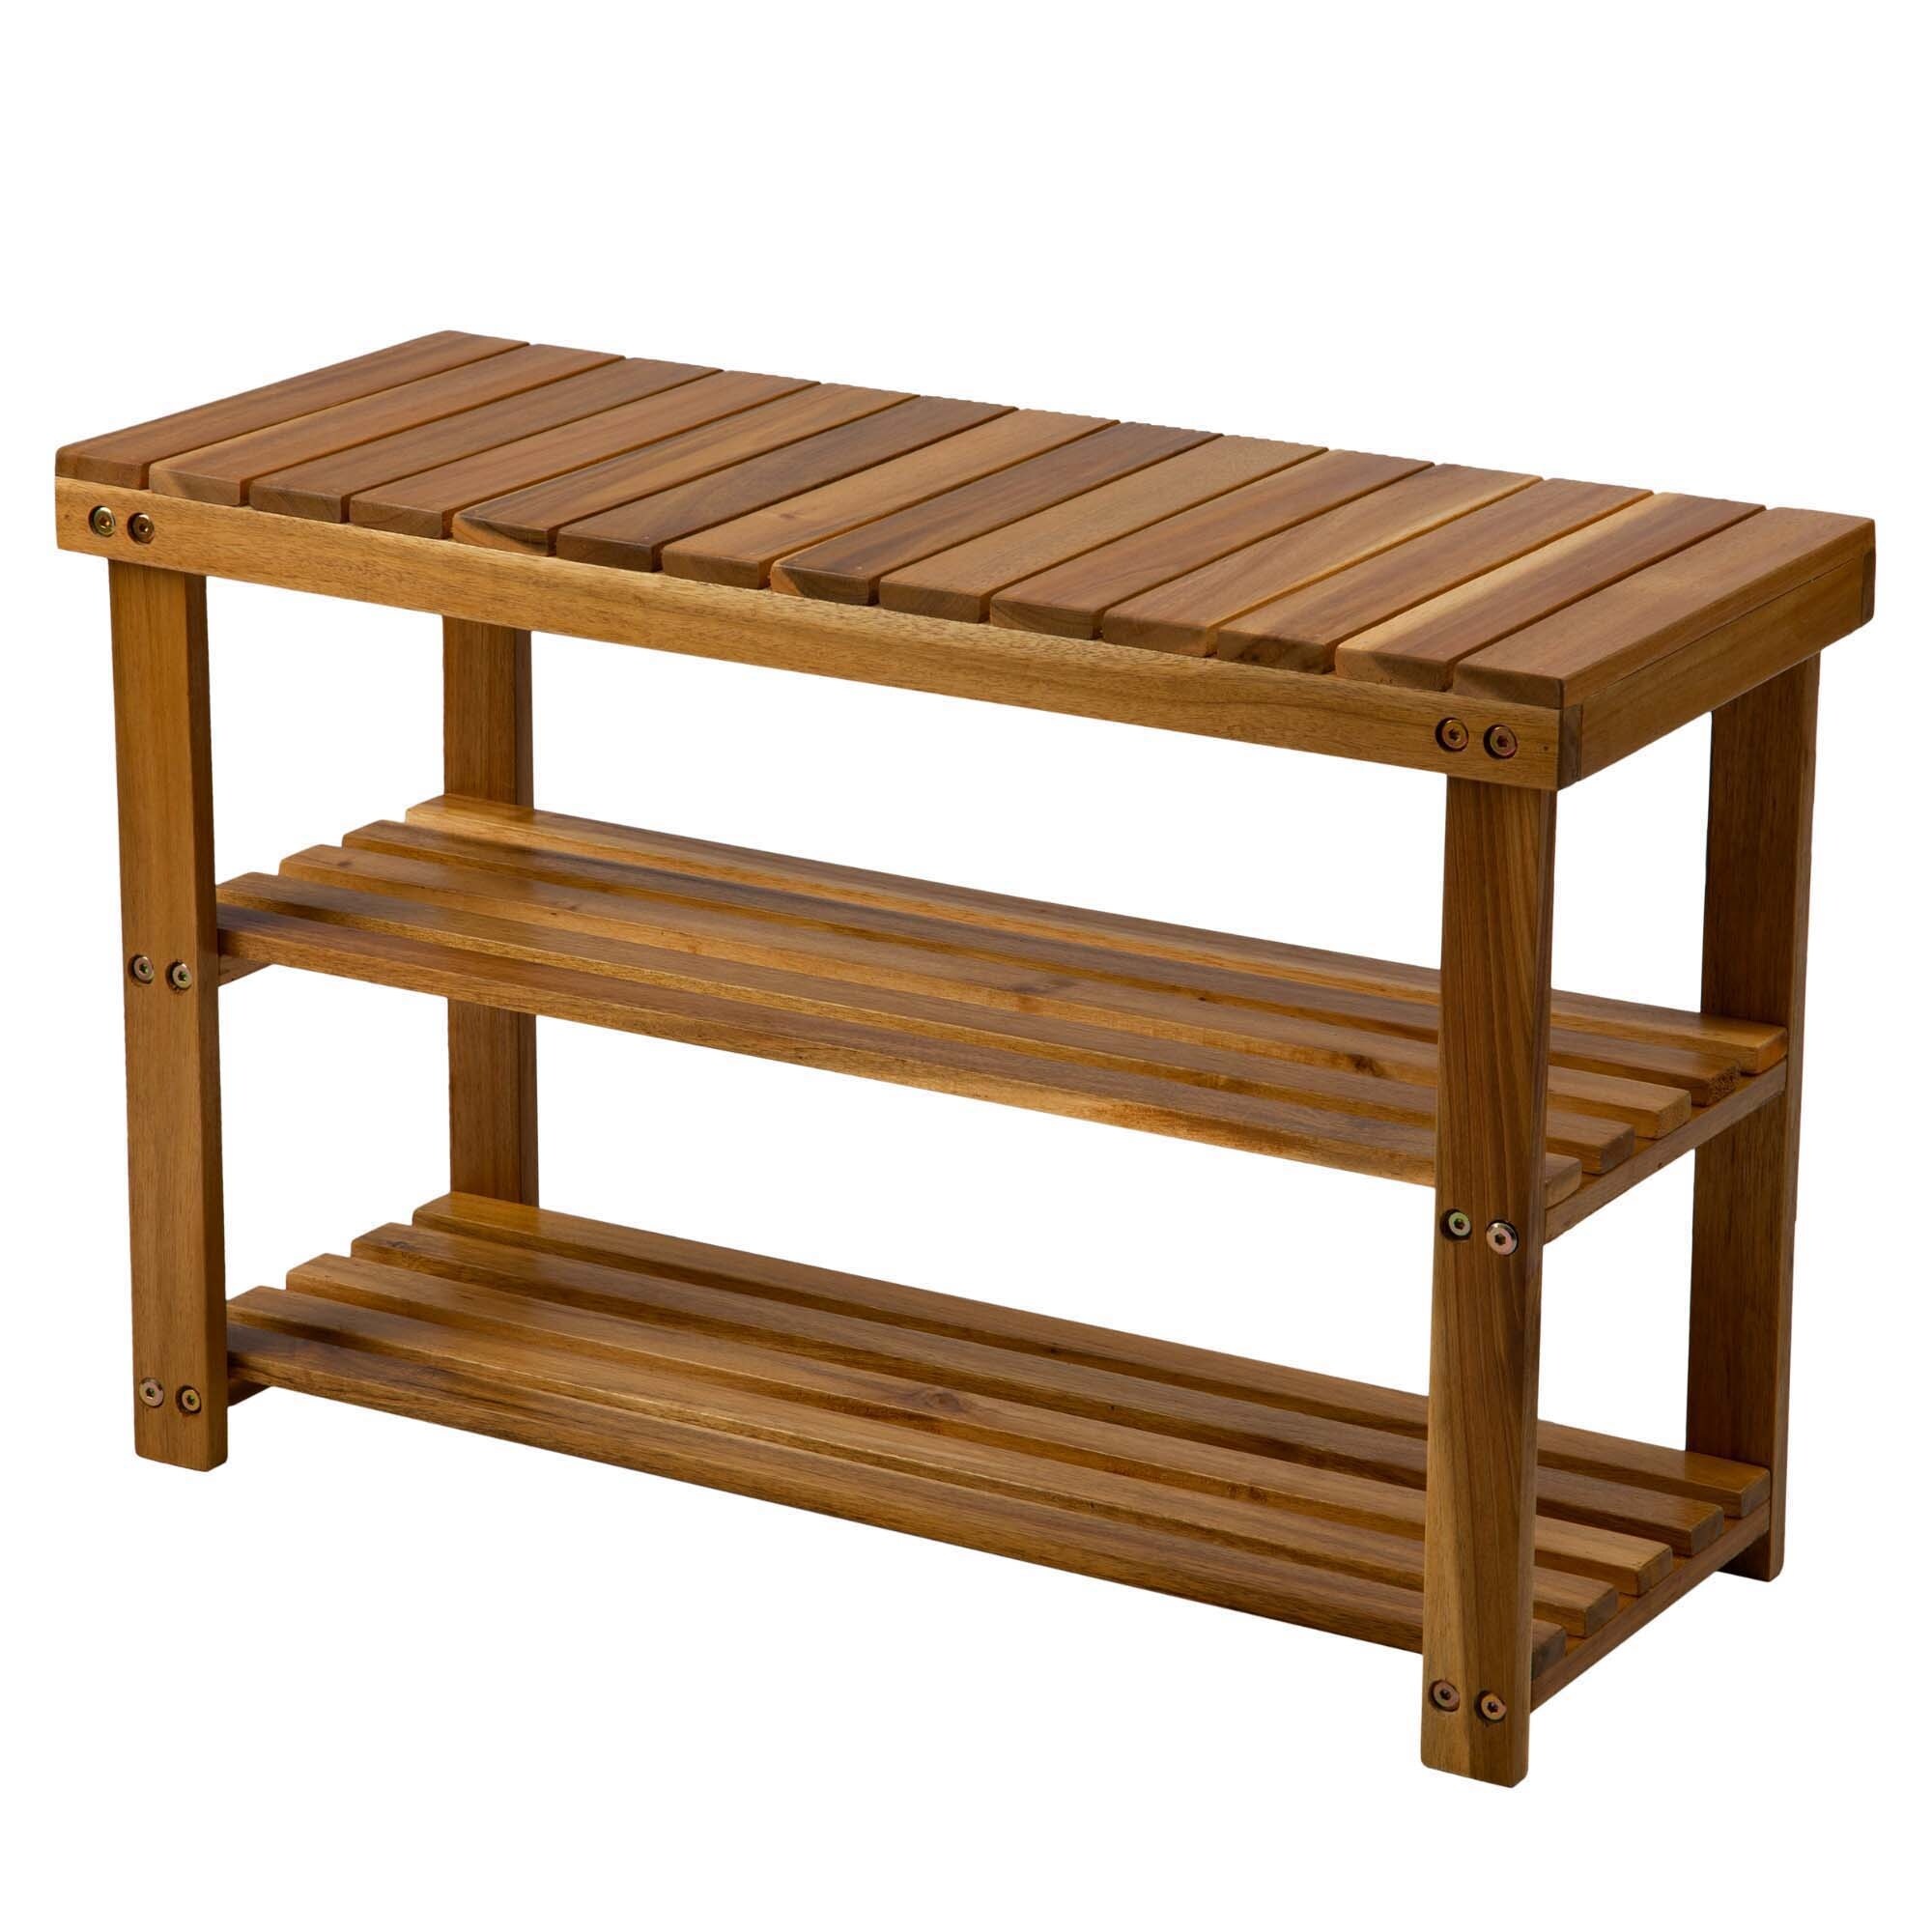 https://ak1.ostkcdn.com/images/products/is/images/direct/5ed045e9bfa5a96906733e42afe105f17ae9294c/Acacia-Wood-Shoe-Rack-Bench.jpg